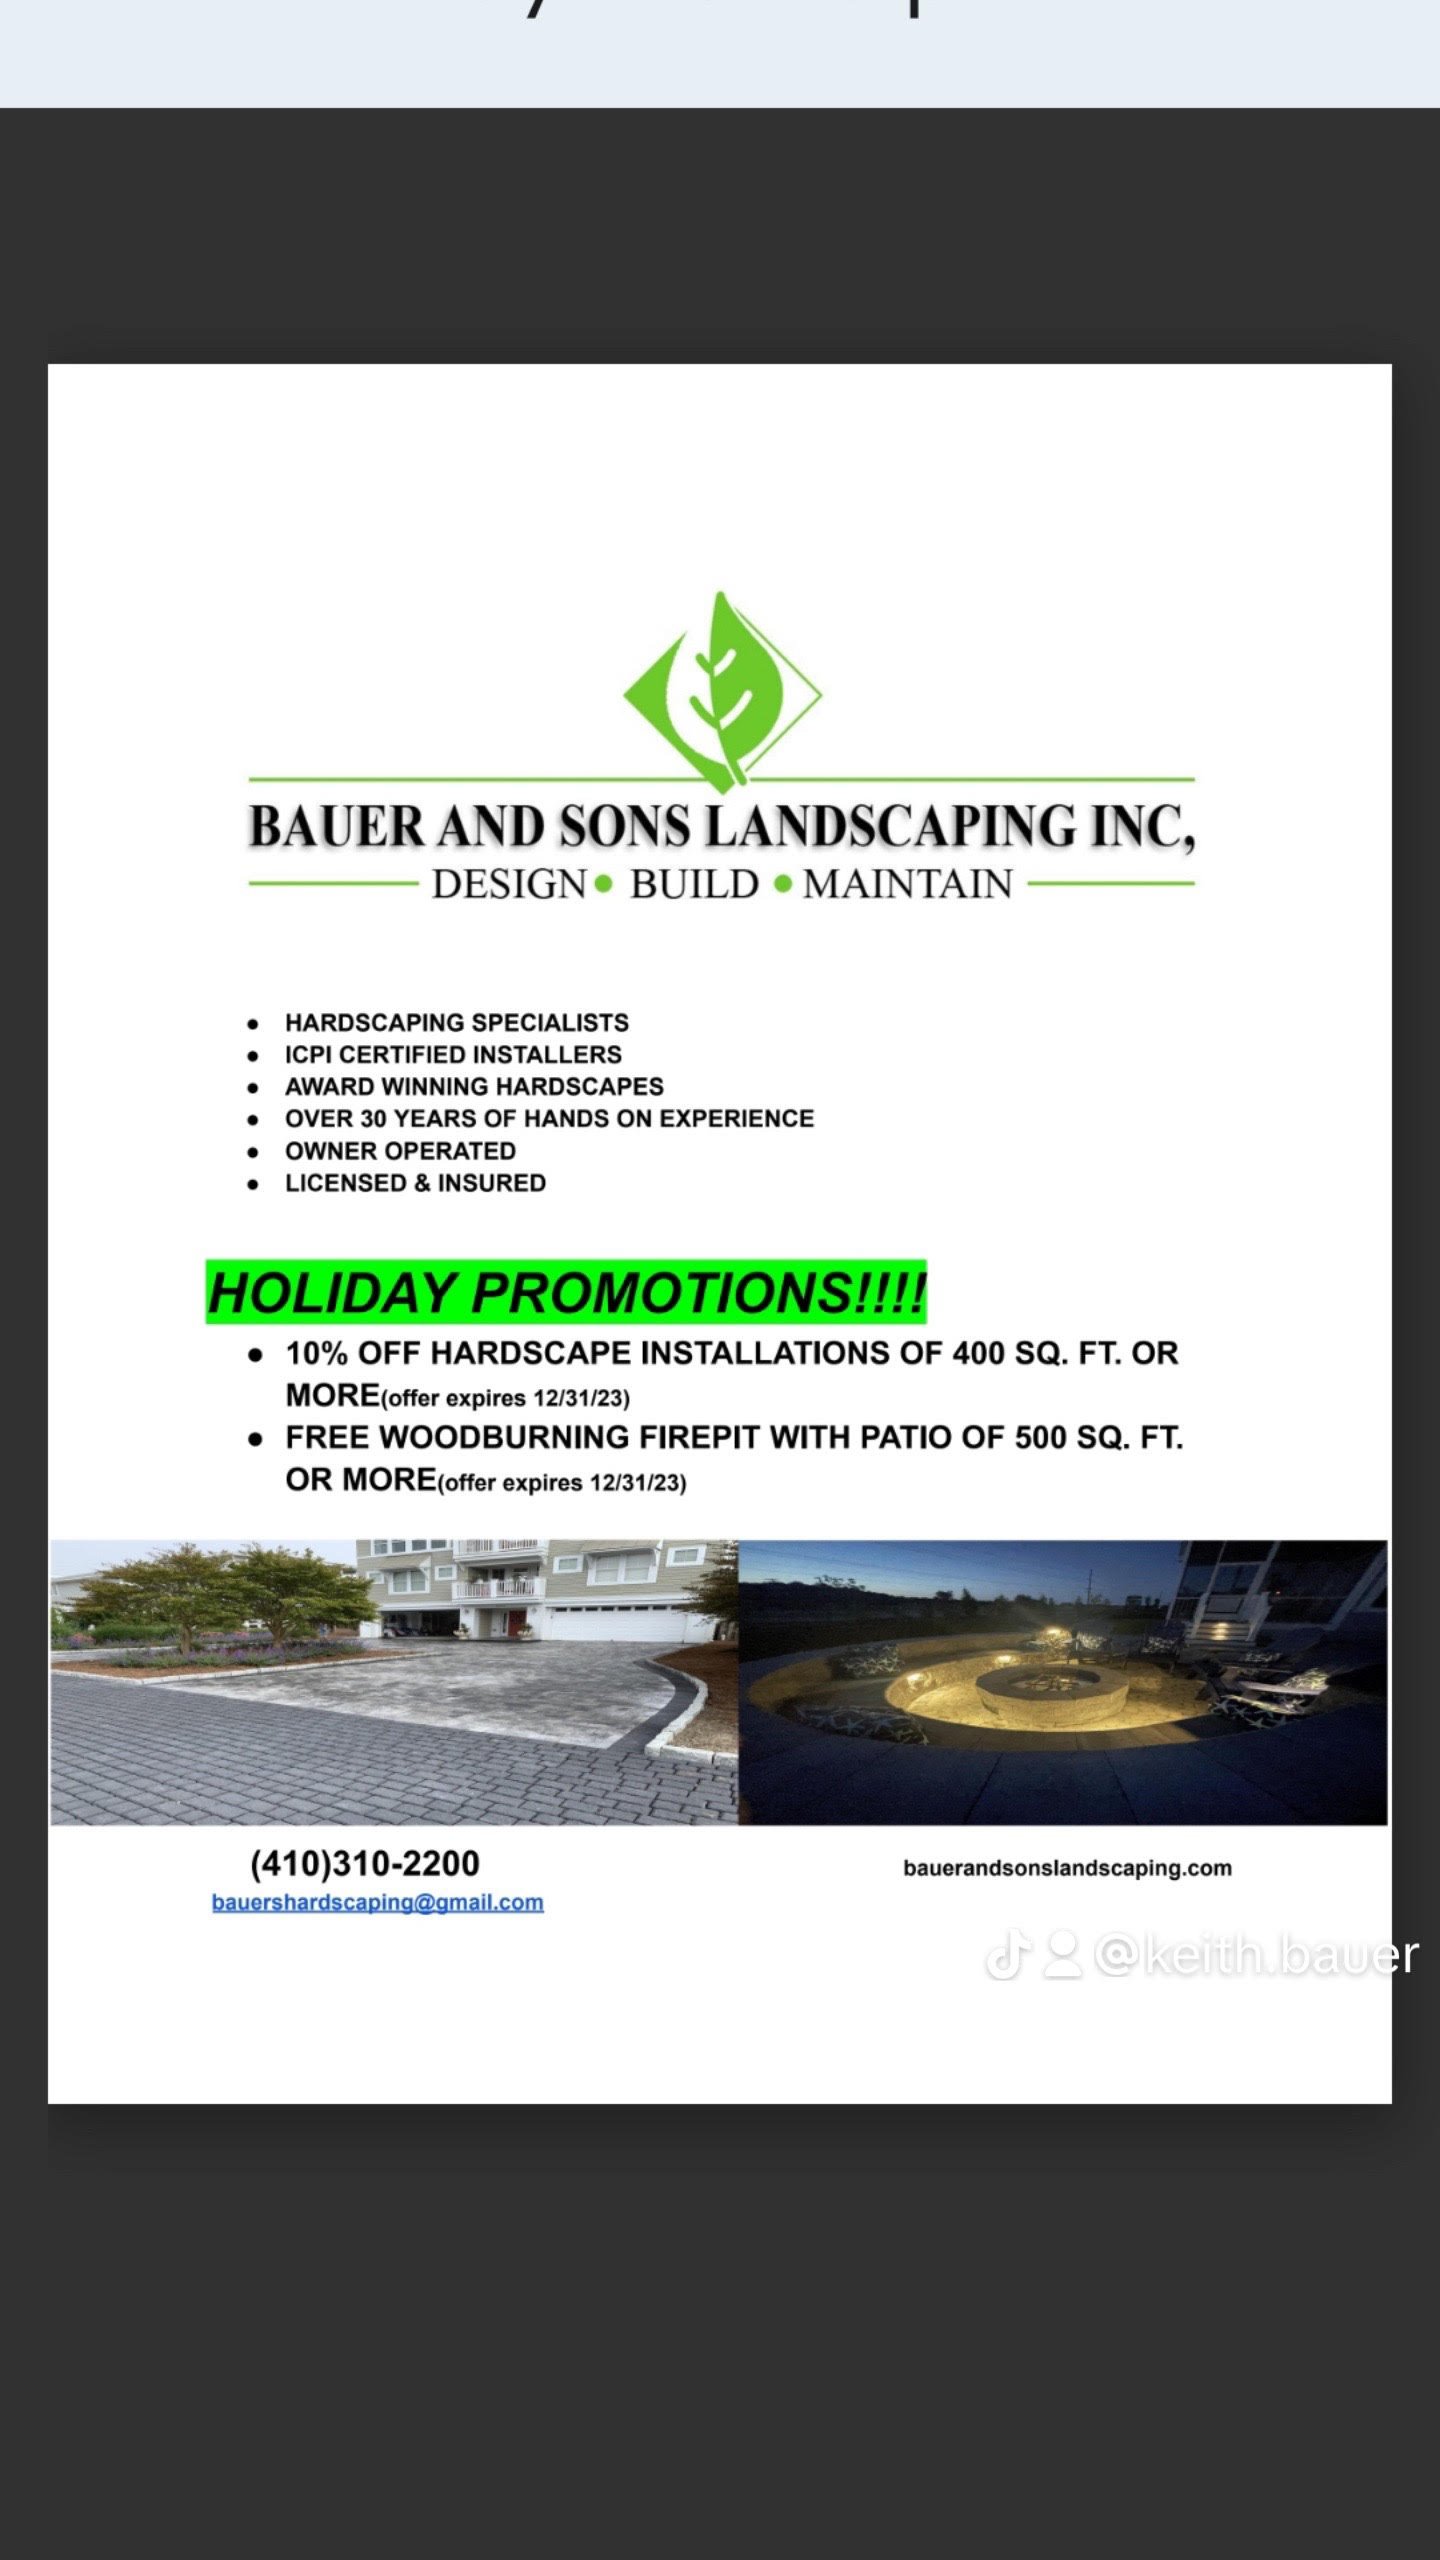 Bauer and Sons Landscaping Logo